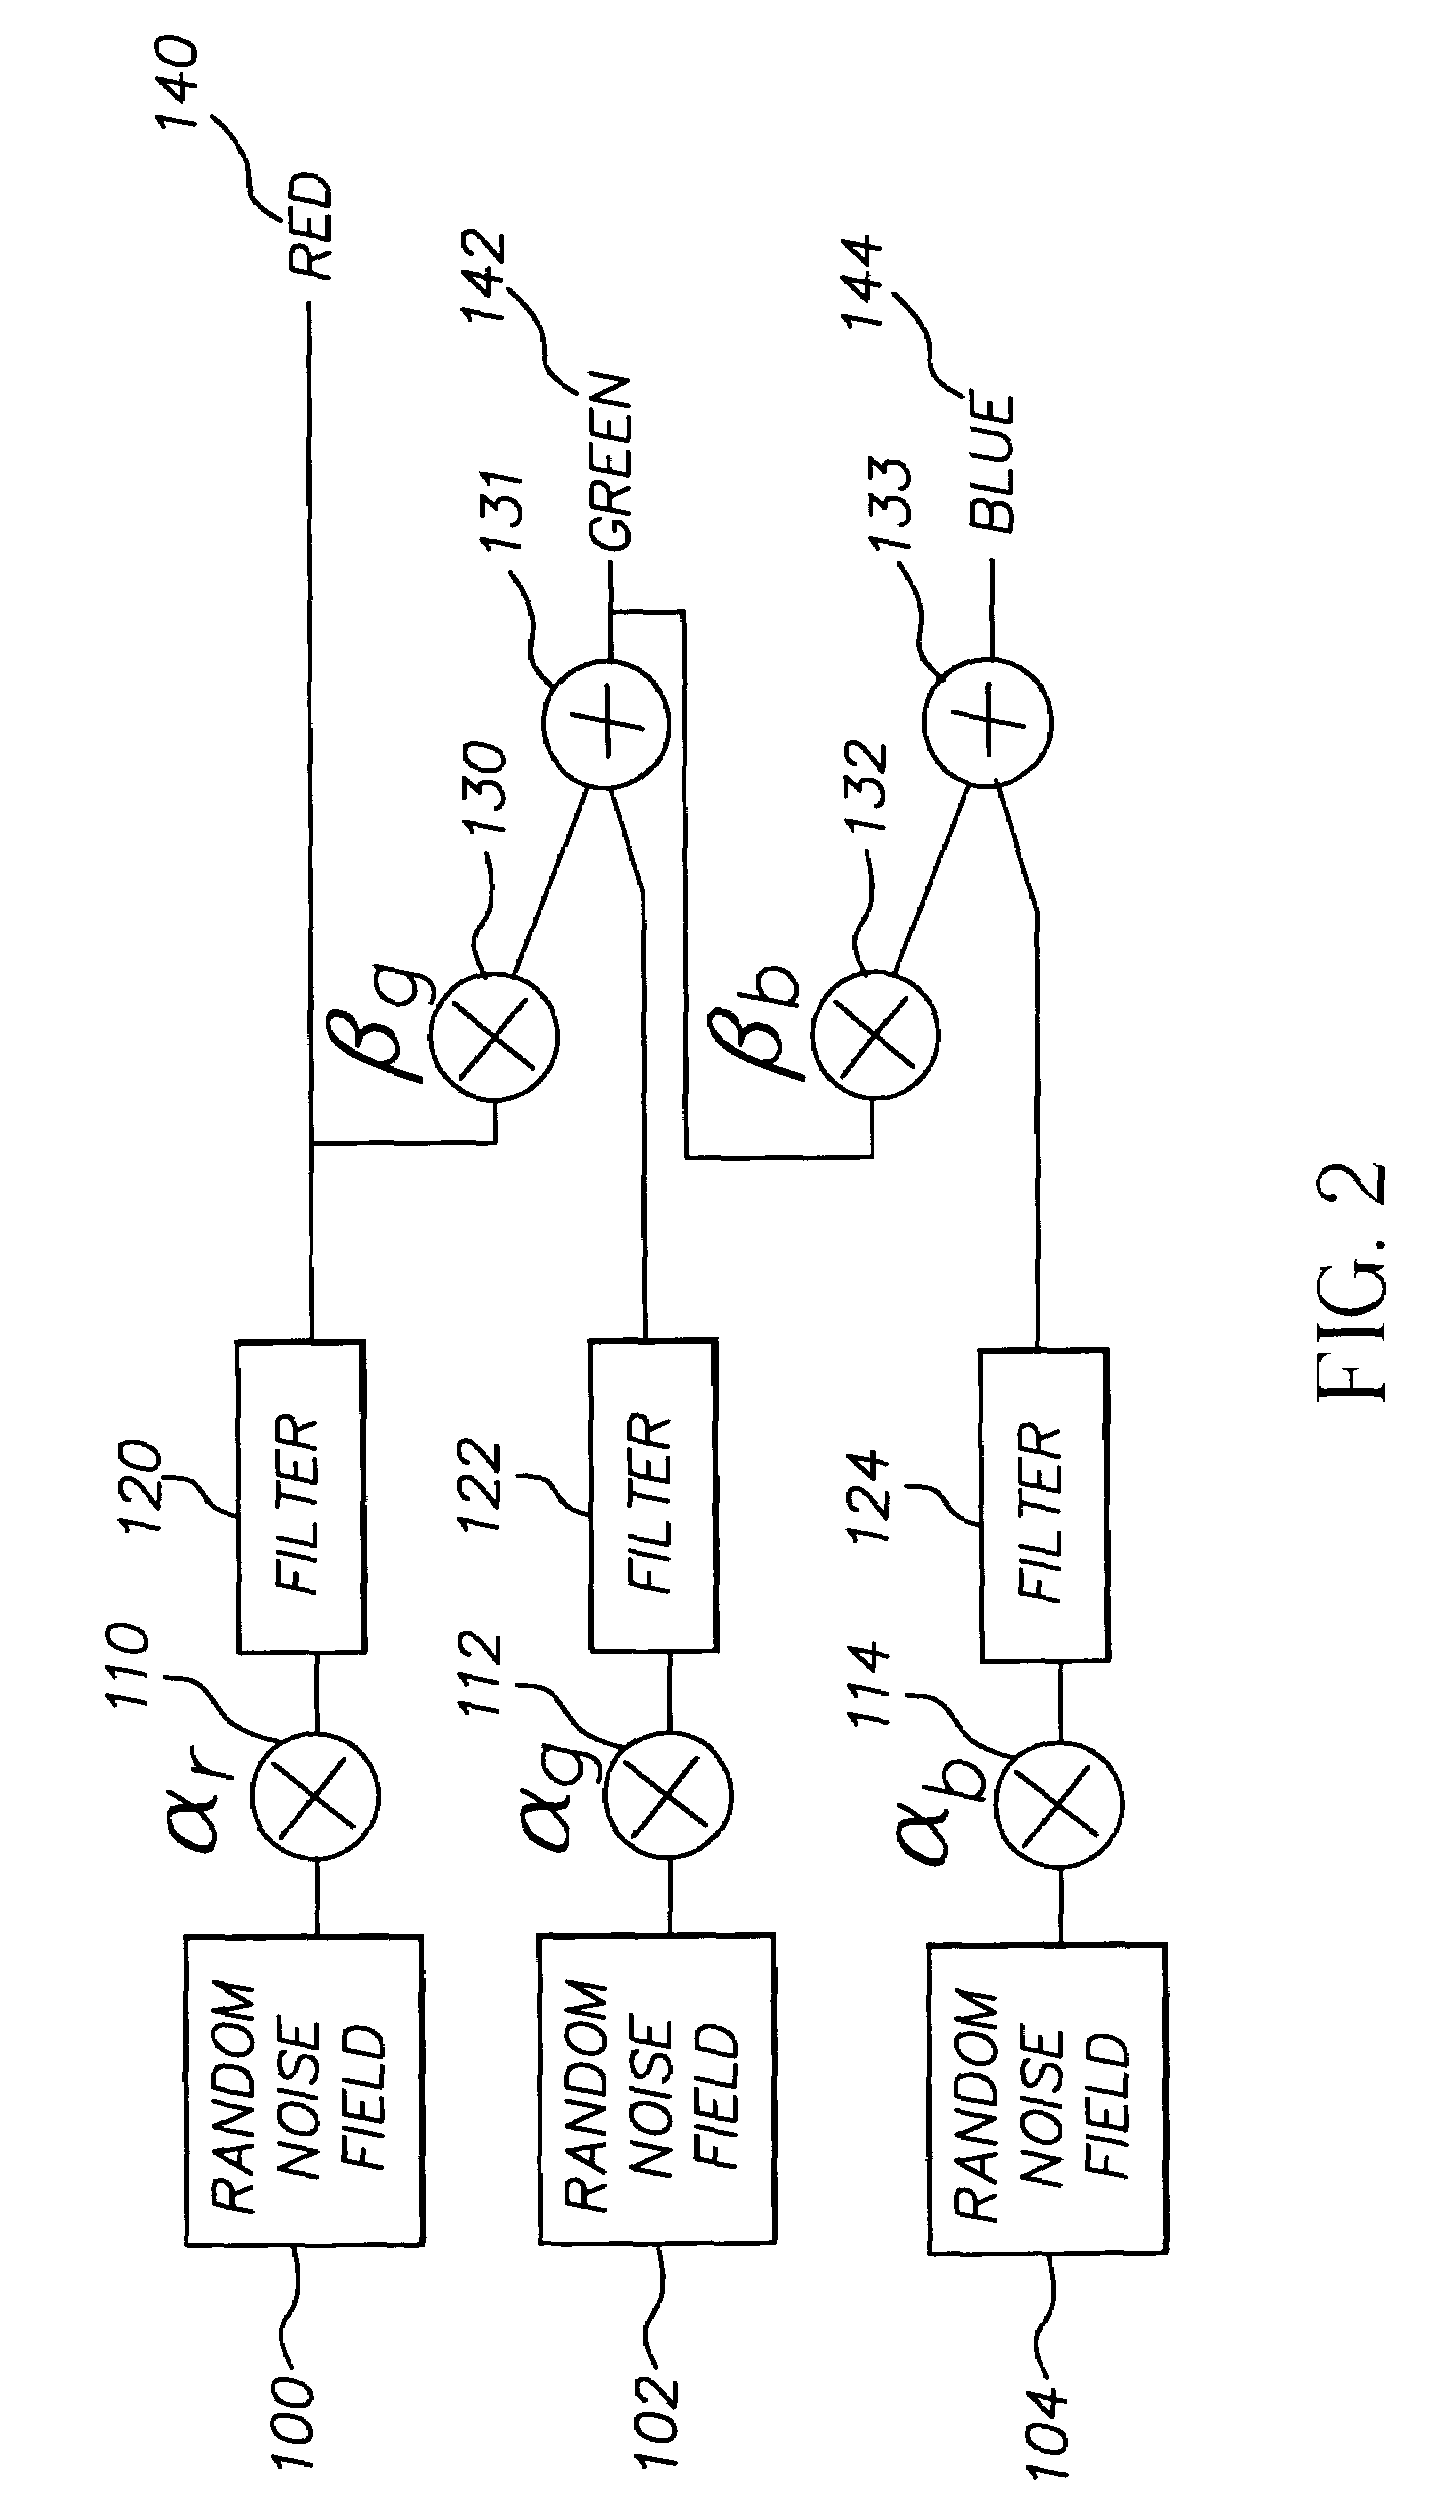 System and method for estimating, synthesizing and matching noise in digital images and image sequences